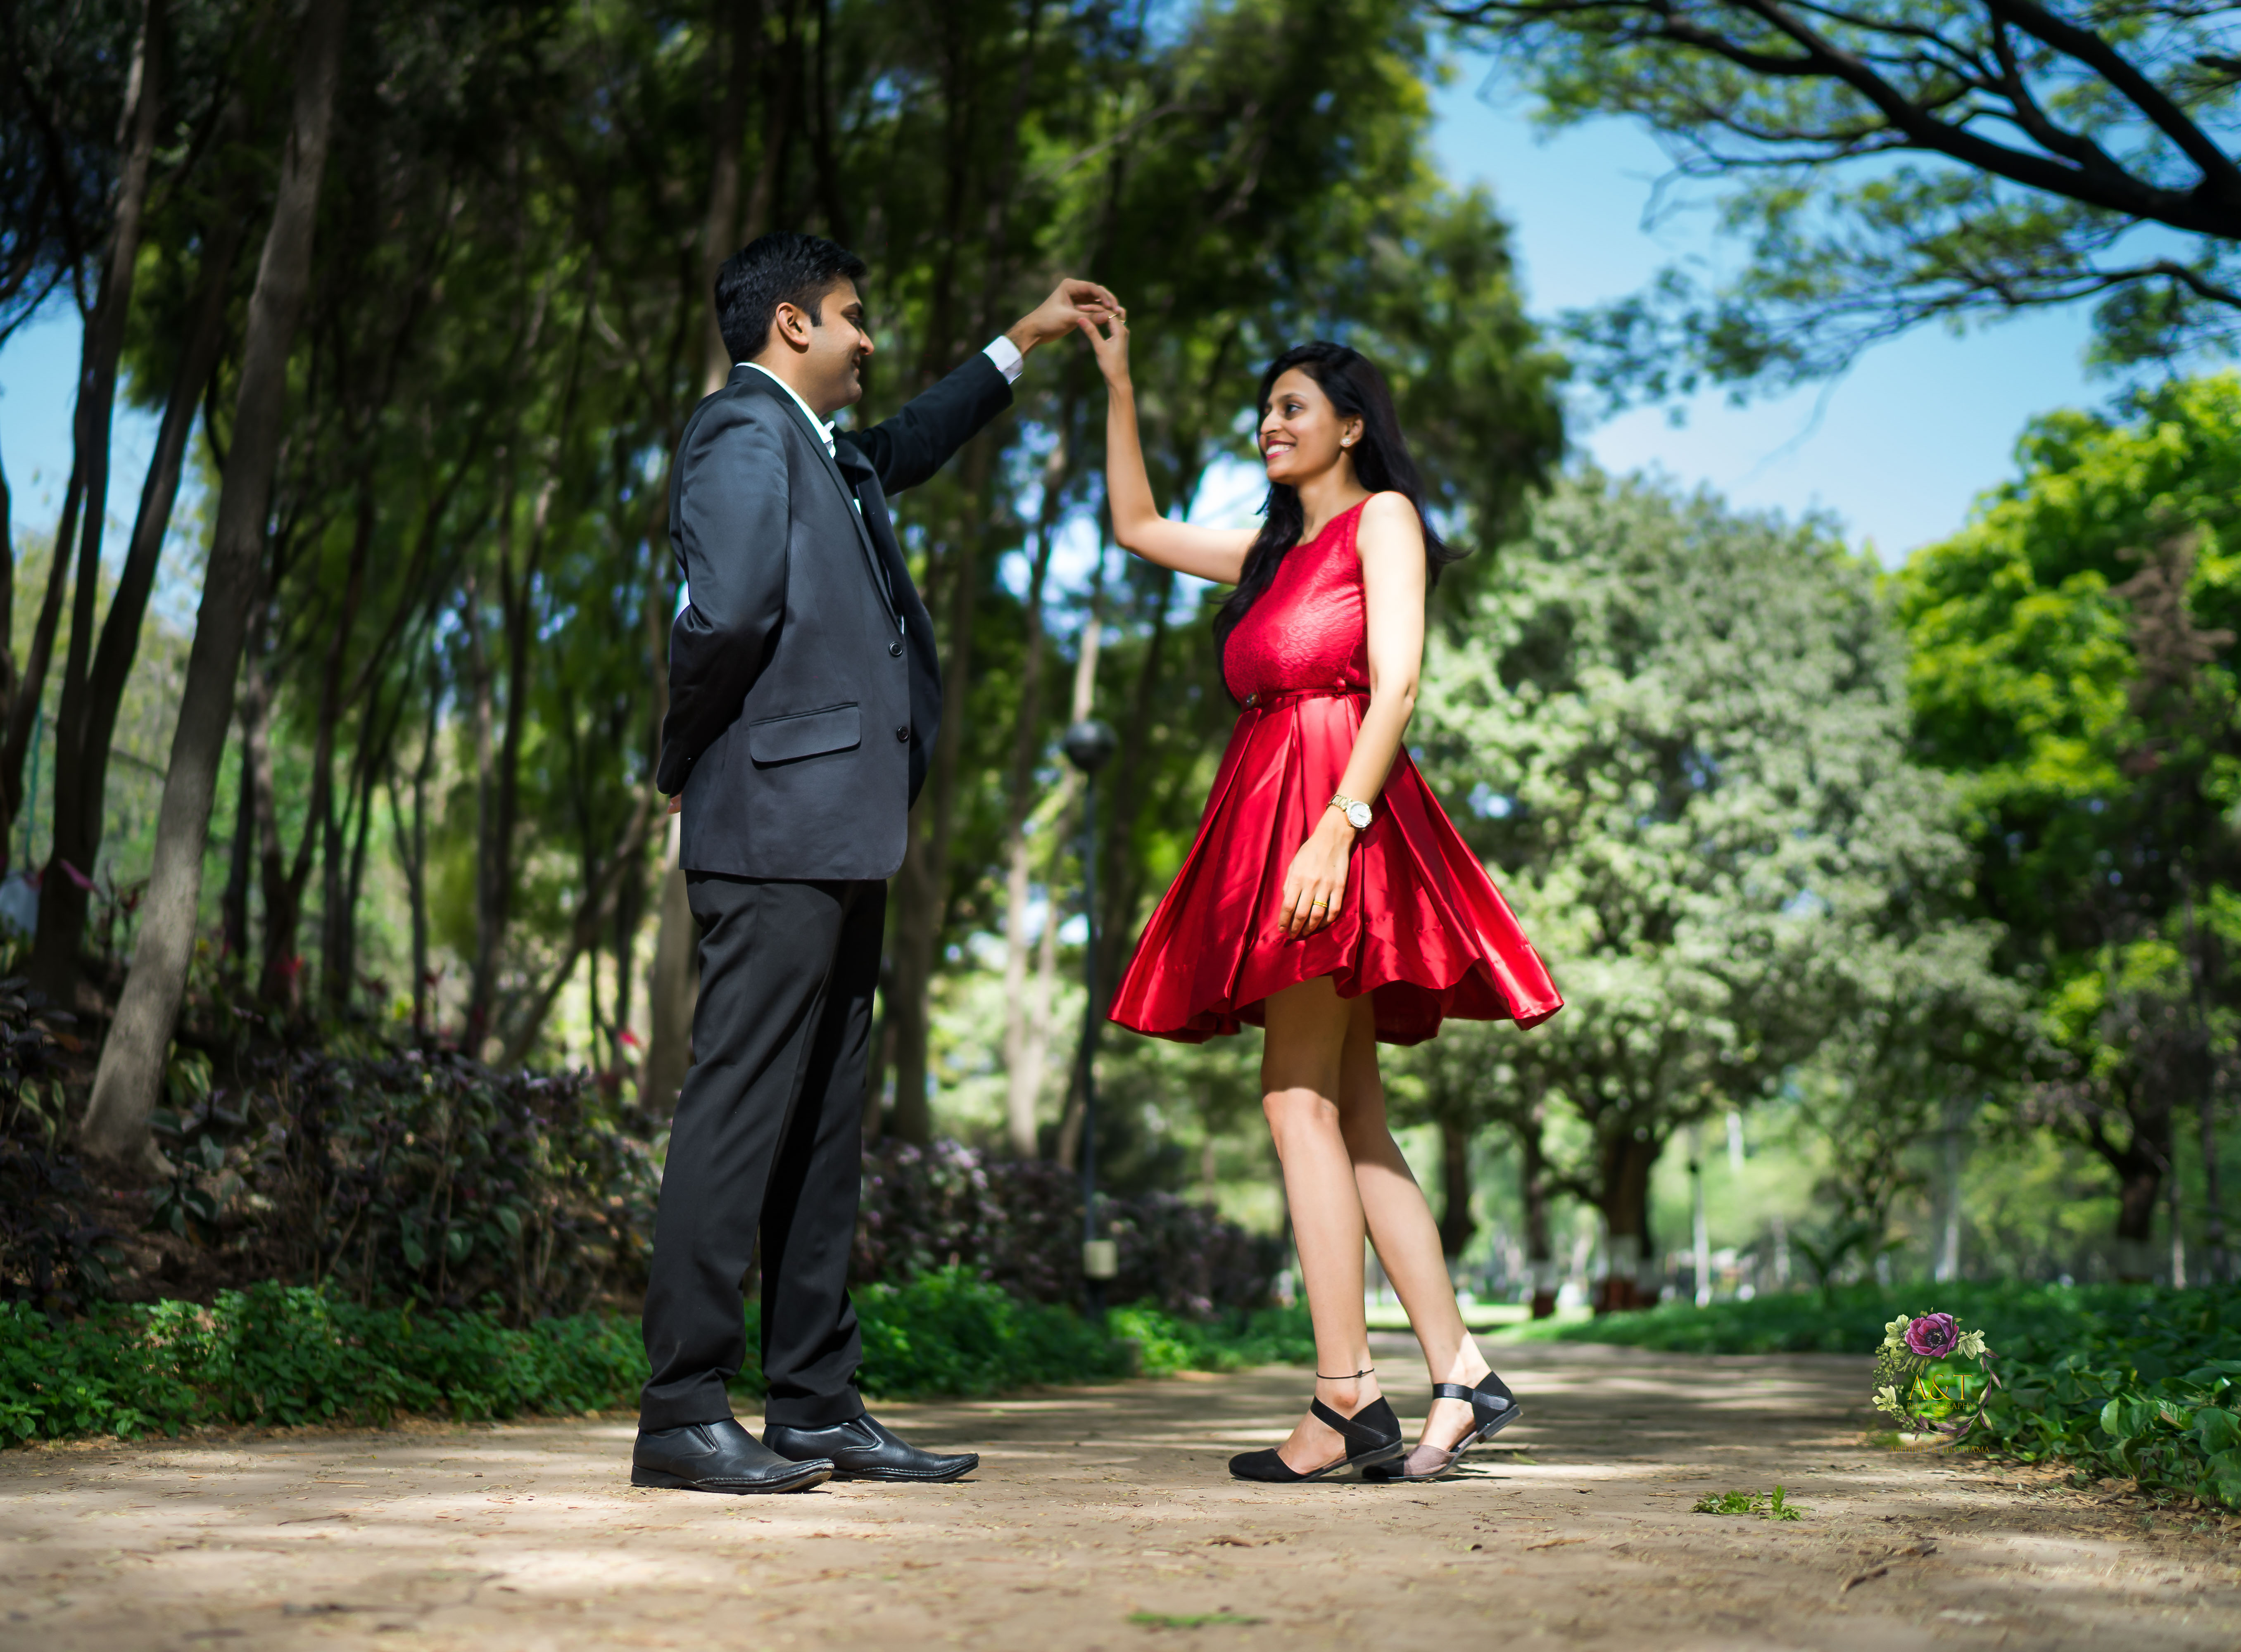 Pre-wedding Photoshoot Poses in a Garden or Lush Green Forest 